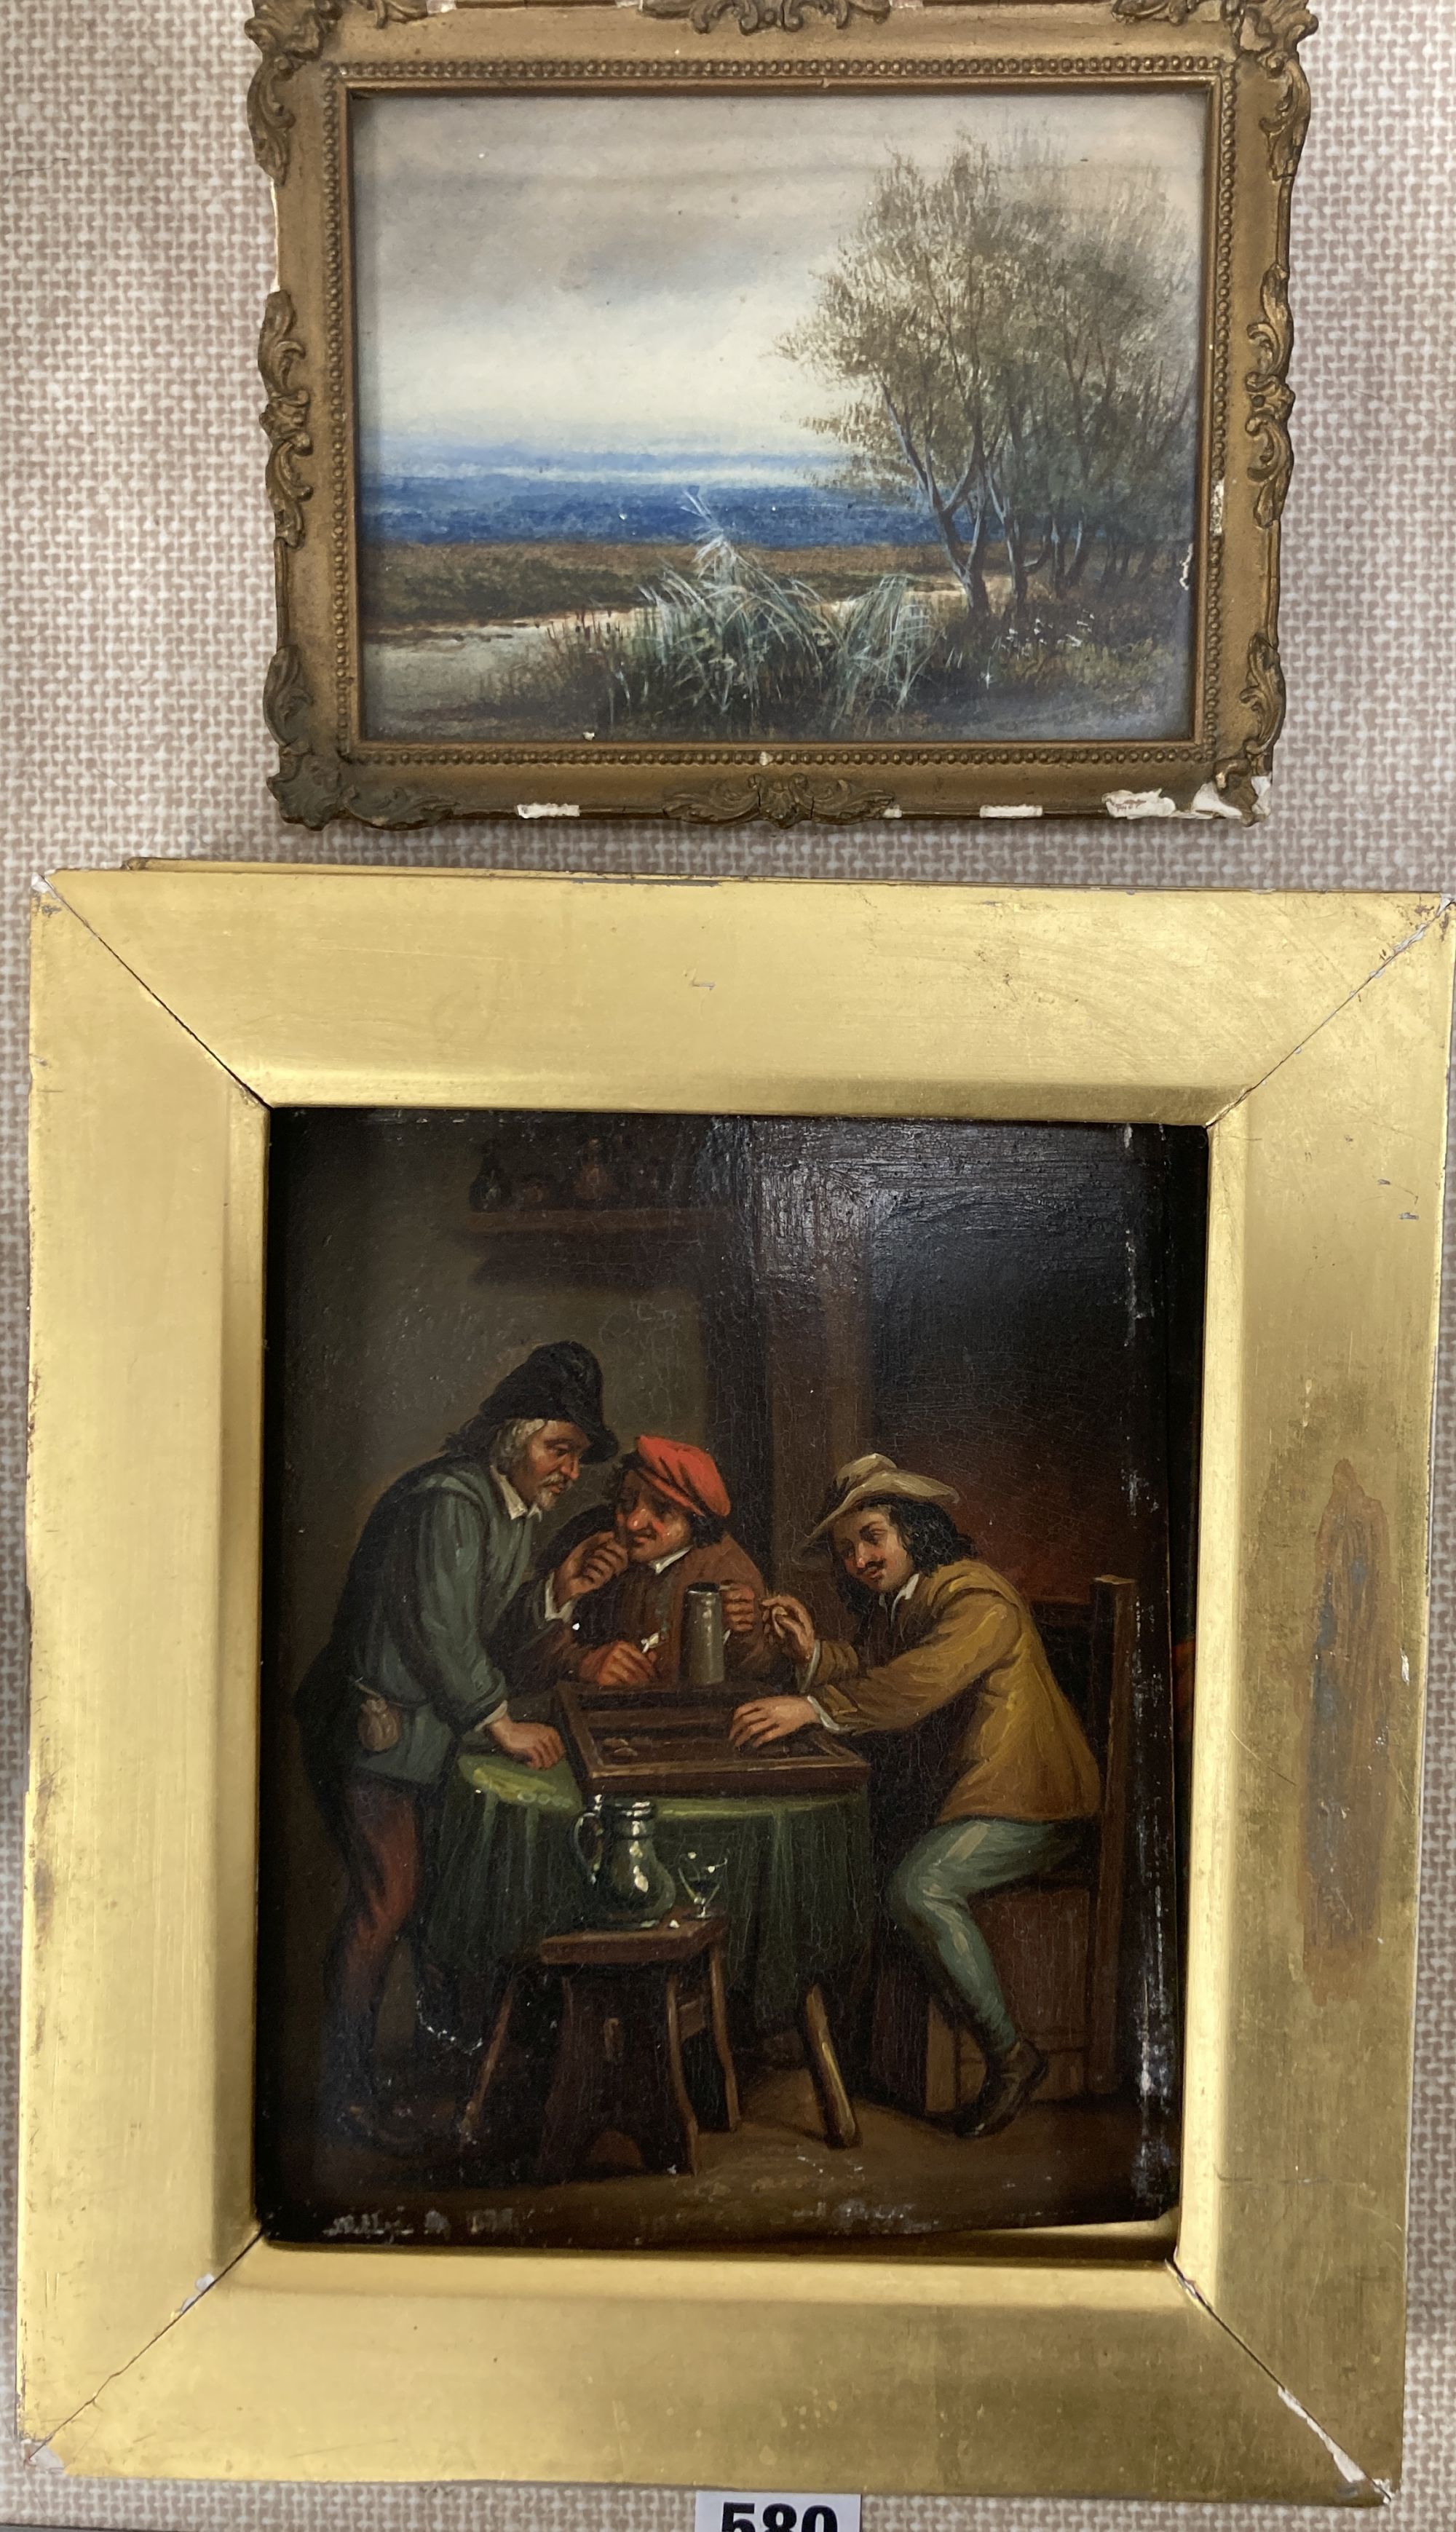 19th century German School, pair of oils on zinc, 17th interiors with figures playing games, 20 x 16cm and a small watercolour landscap